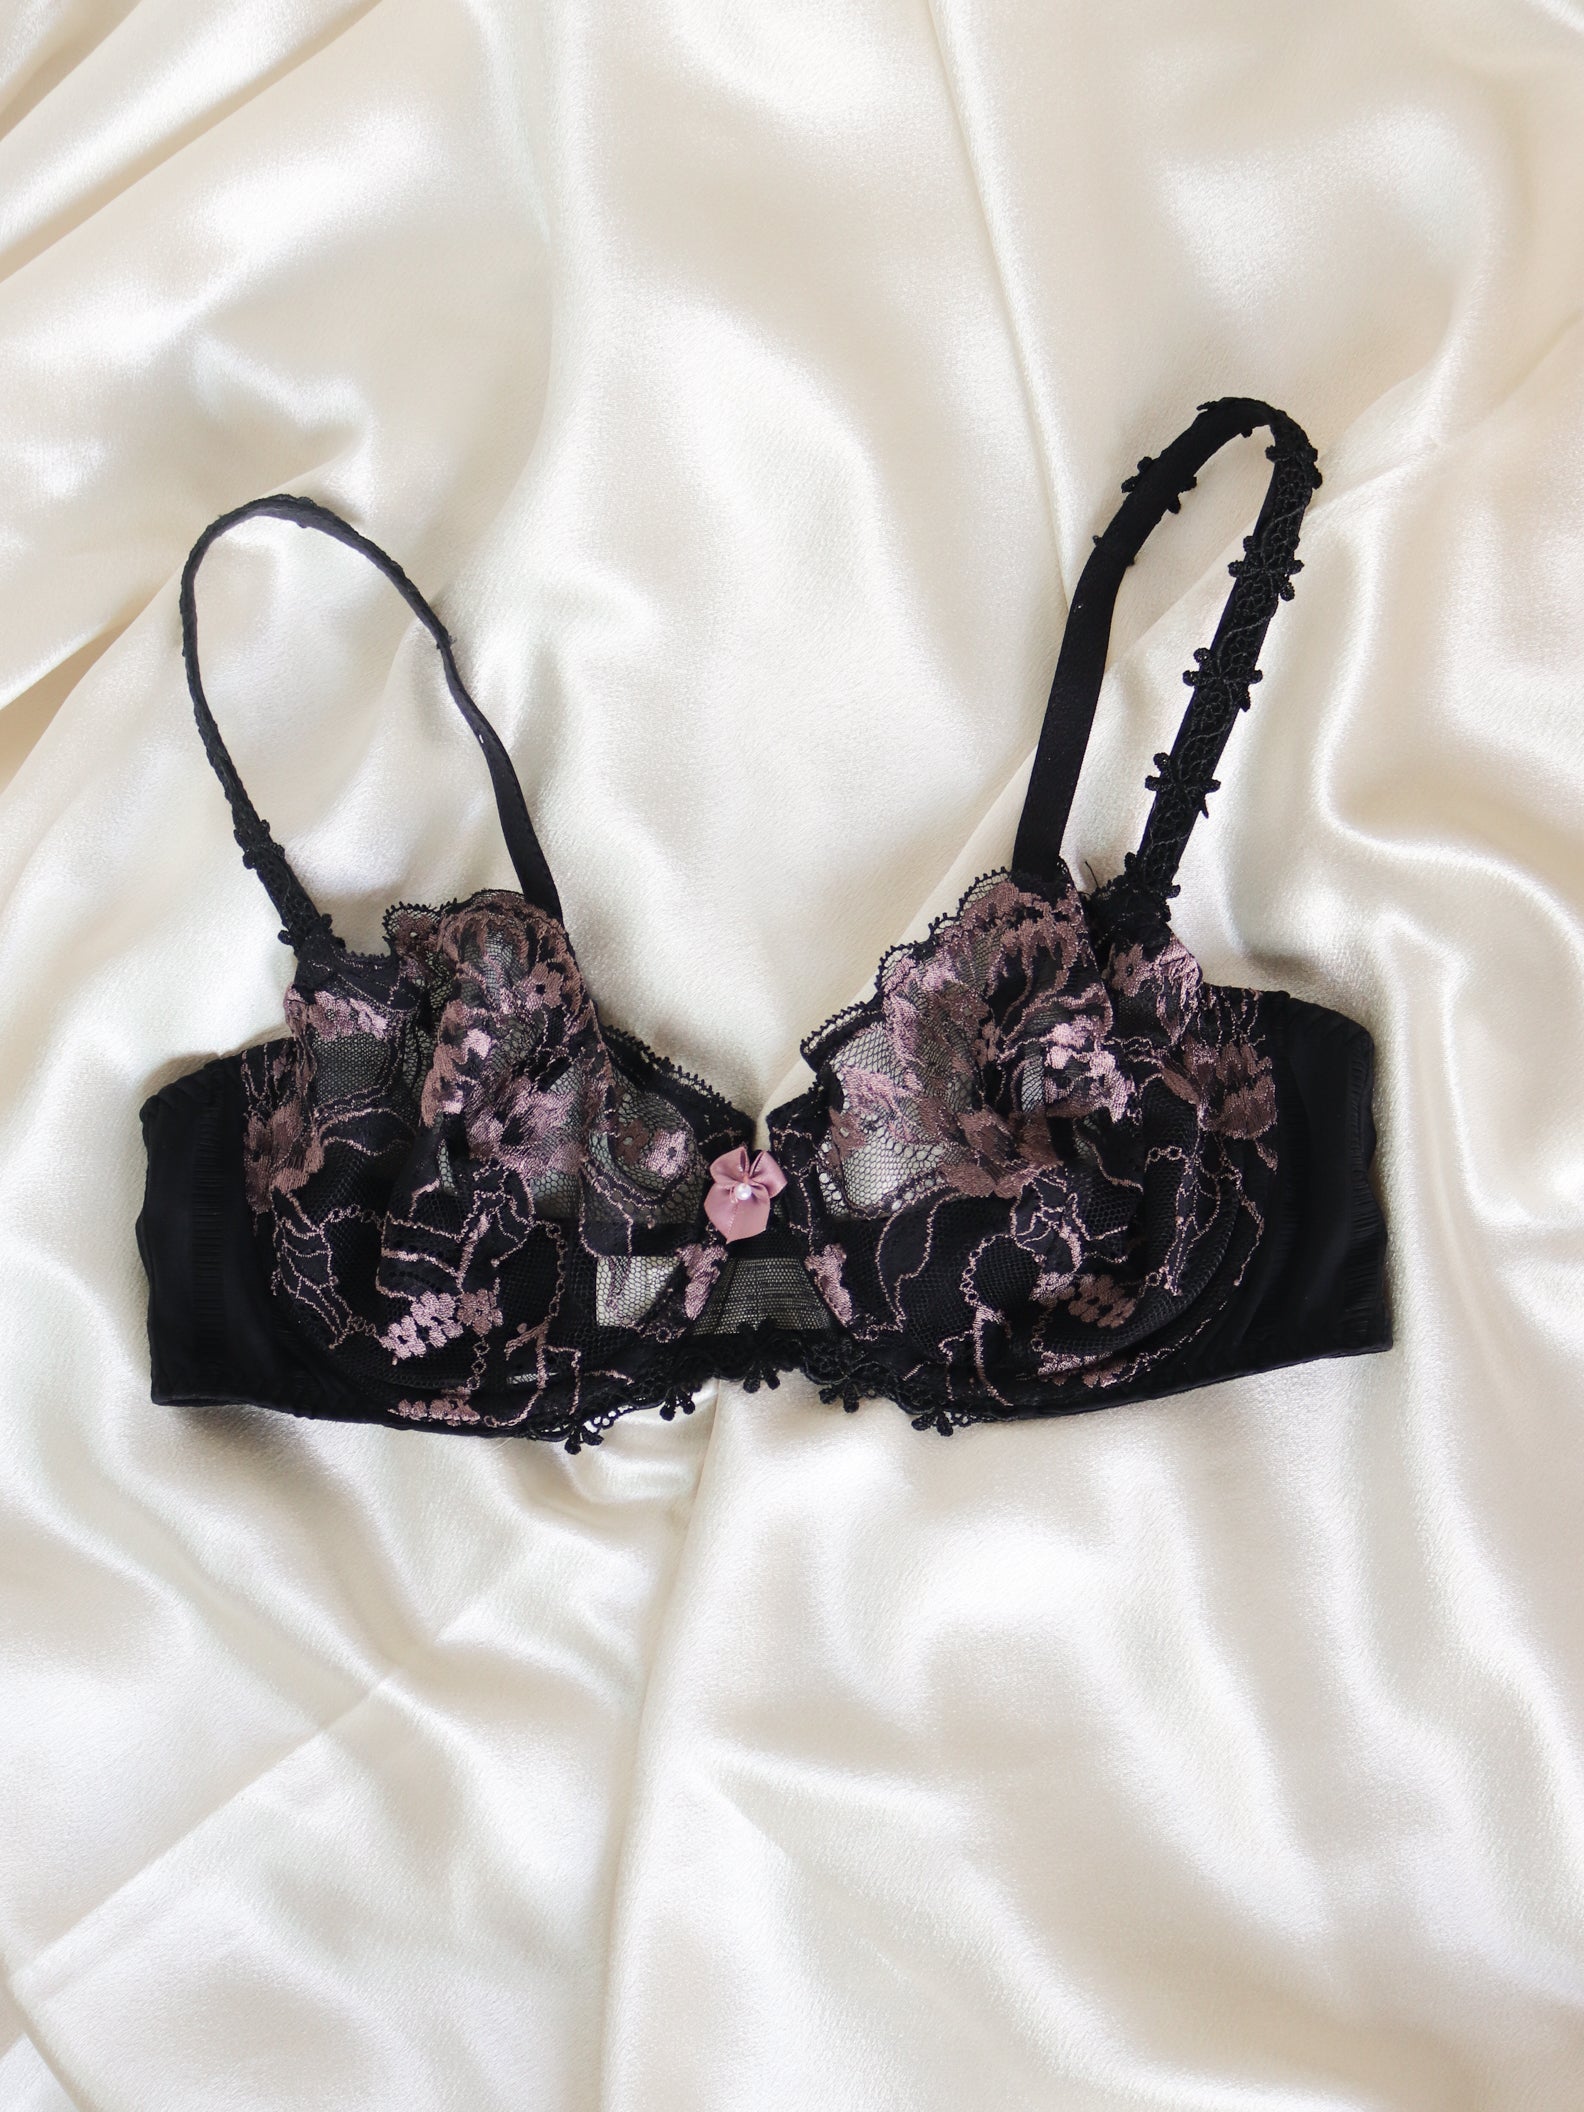 EARLY 1990's FRENCH DESIGNER EMBROIDERY BRALETTE - (36C/38B/34D + 34D/